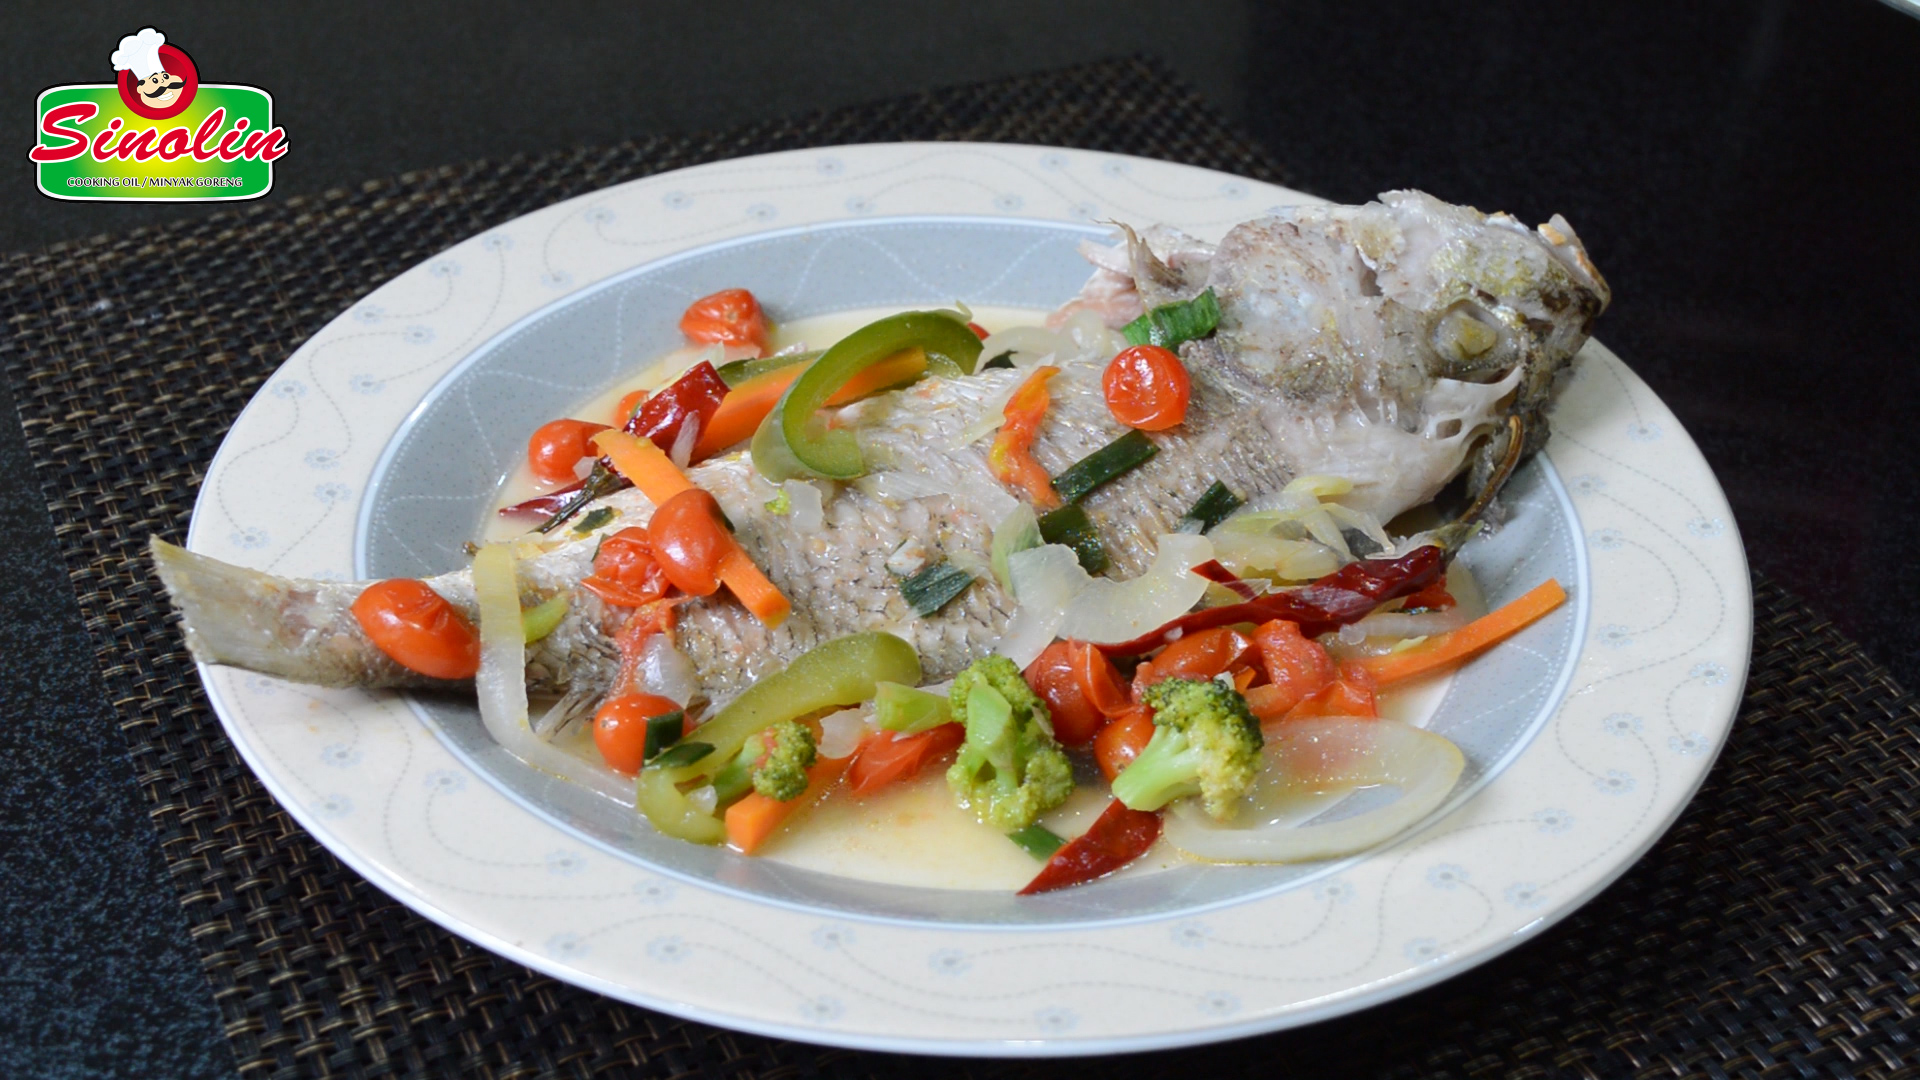 Fish With Tomatoes & Vegetables by Dapur Sinolin